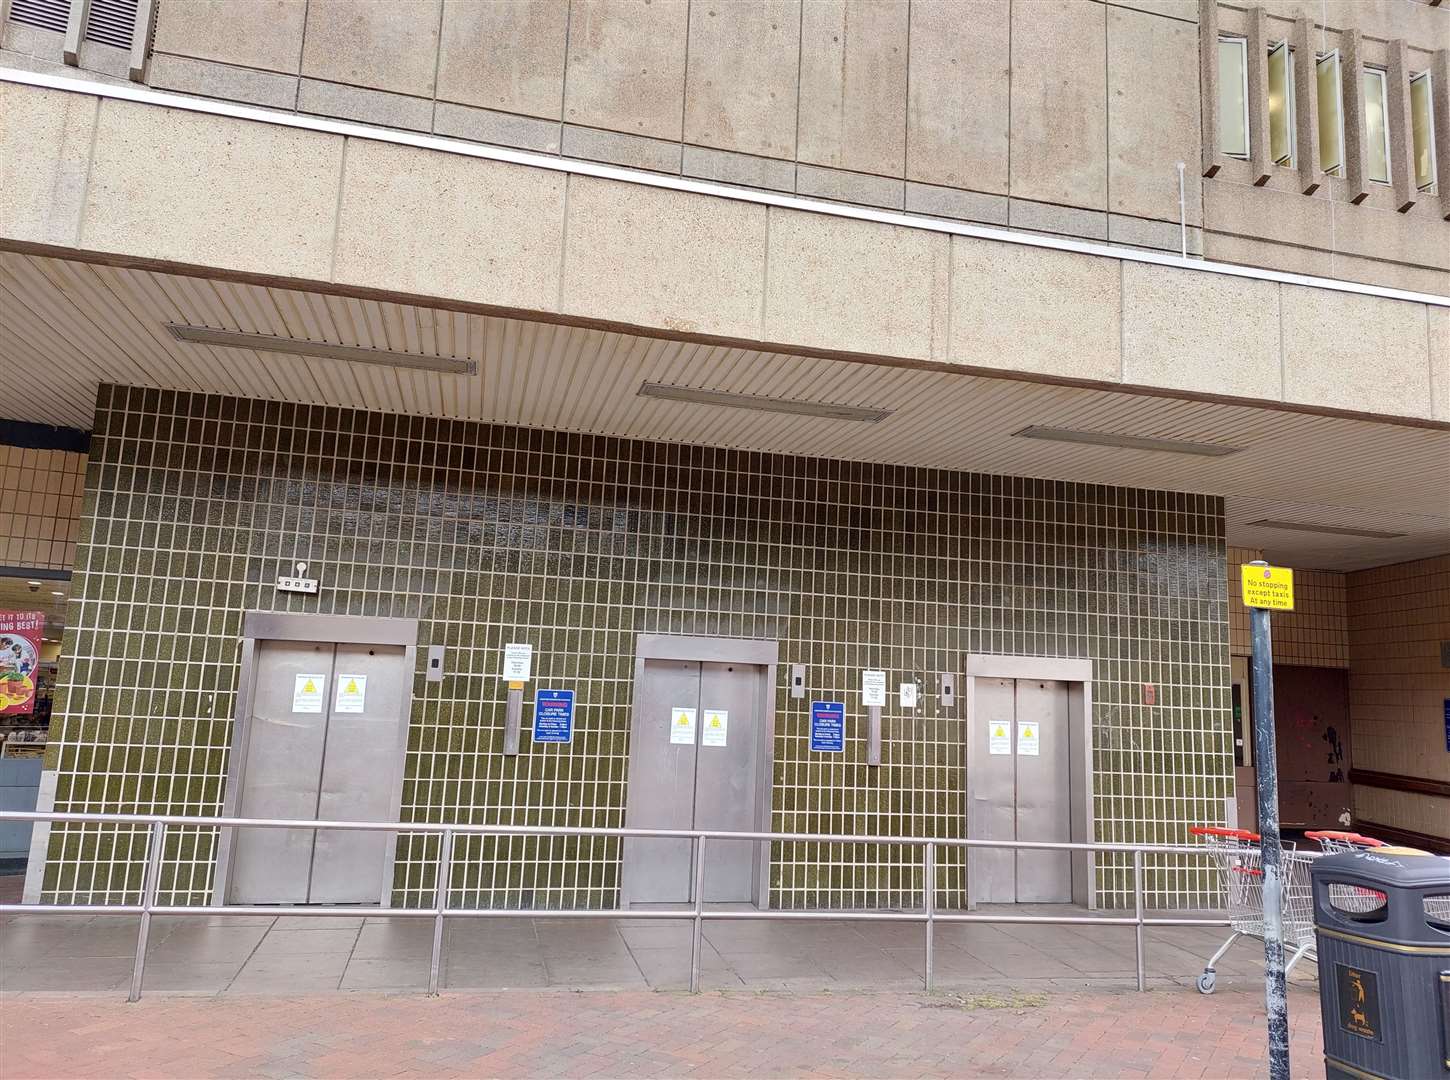 The lifts at Edinburgh Road car park closed earlier this month